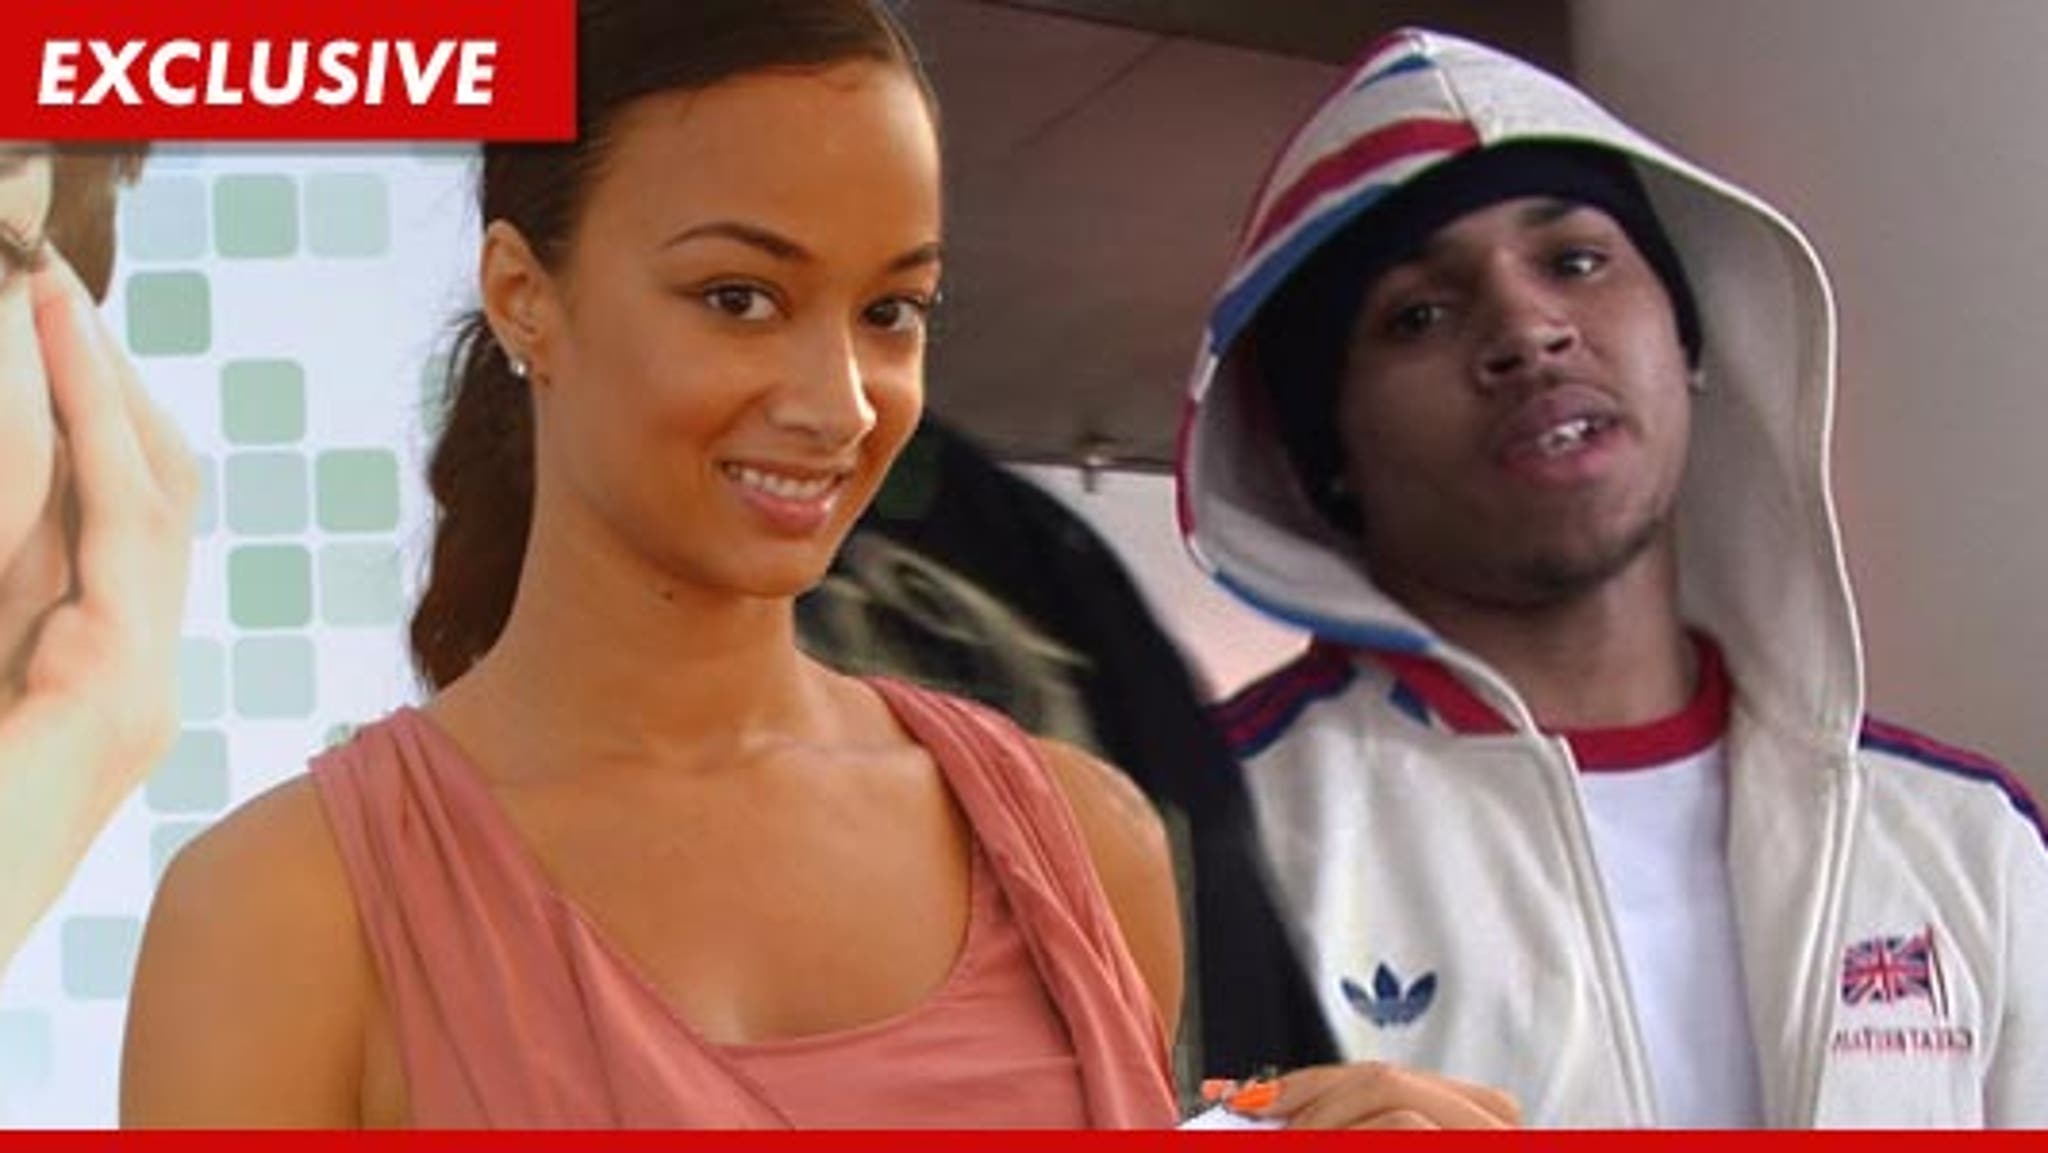 breaking News: Meet Draya Michele's Baby Daddy And Their Adorable Child